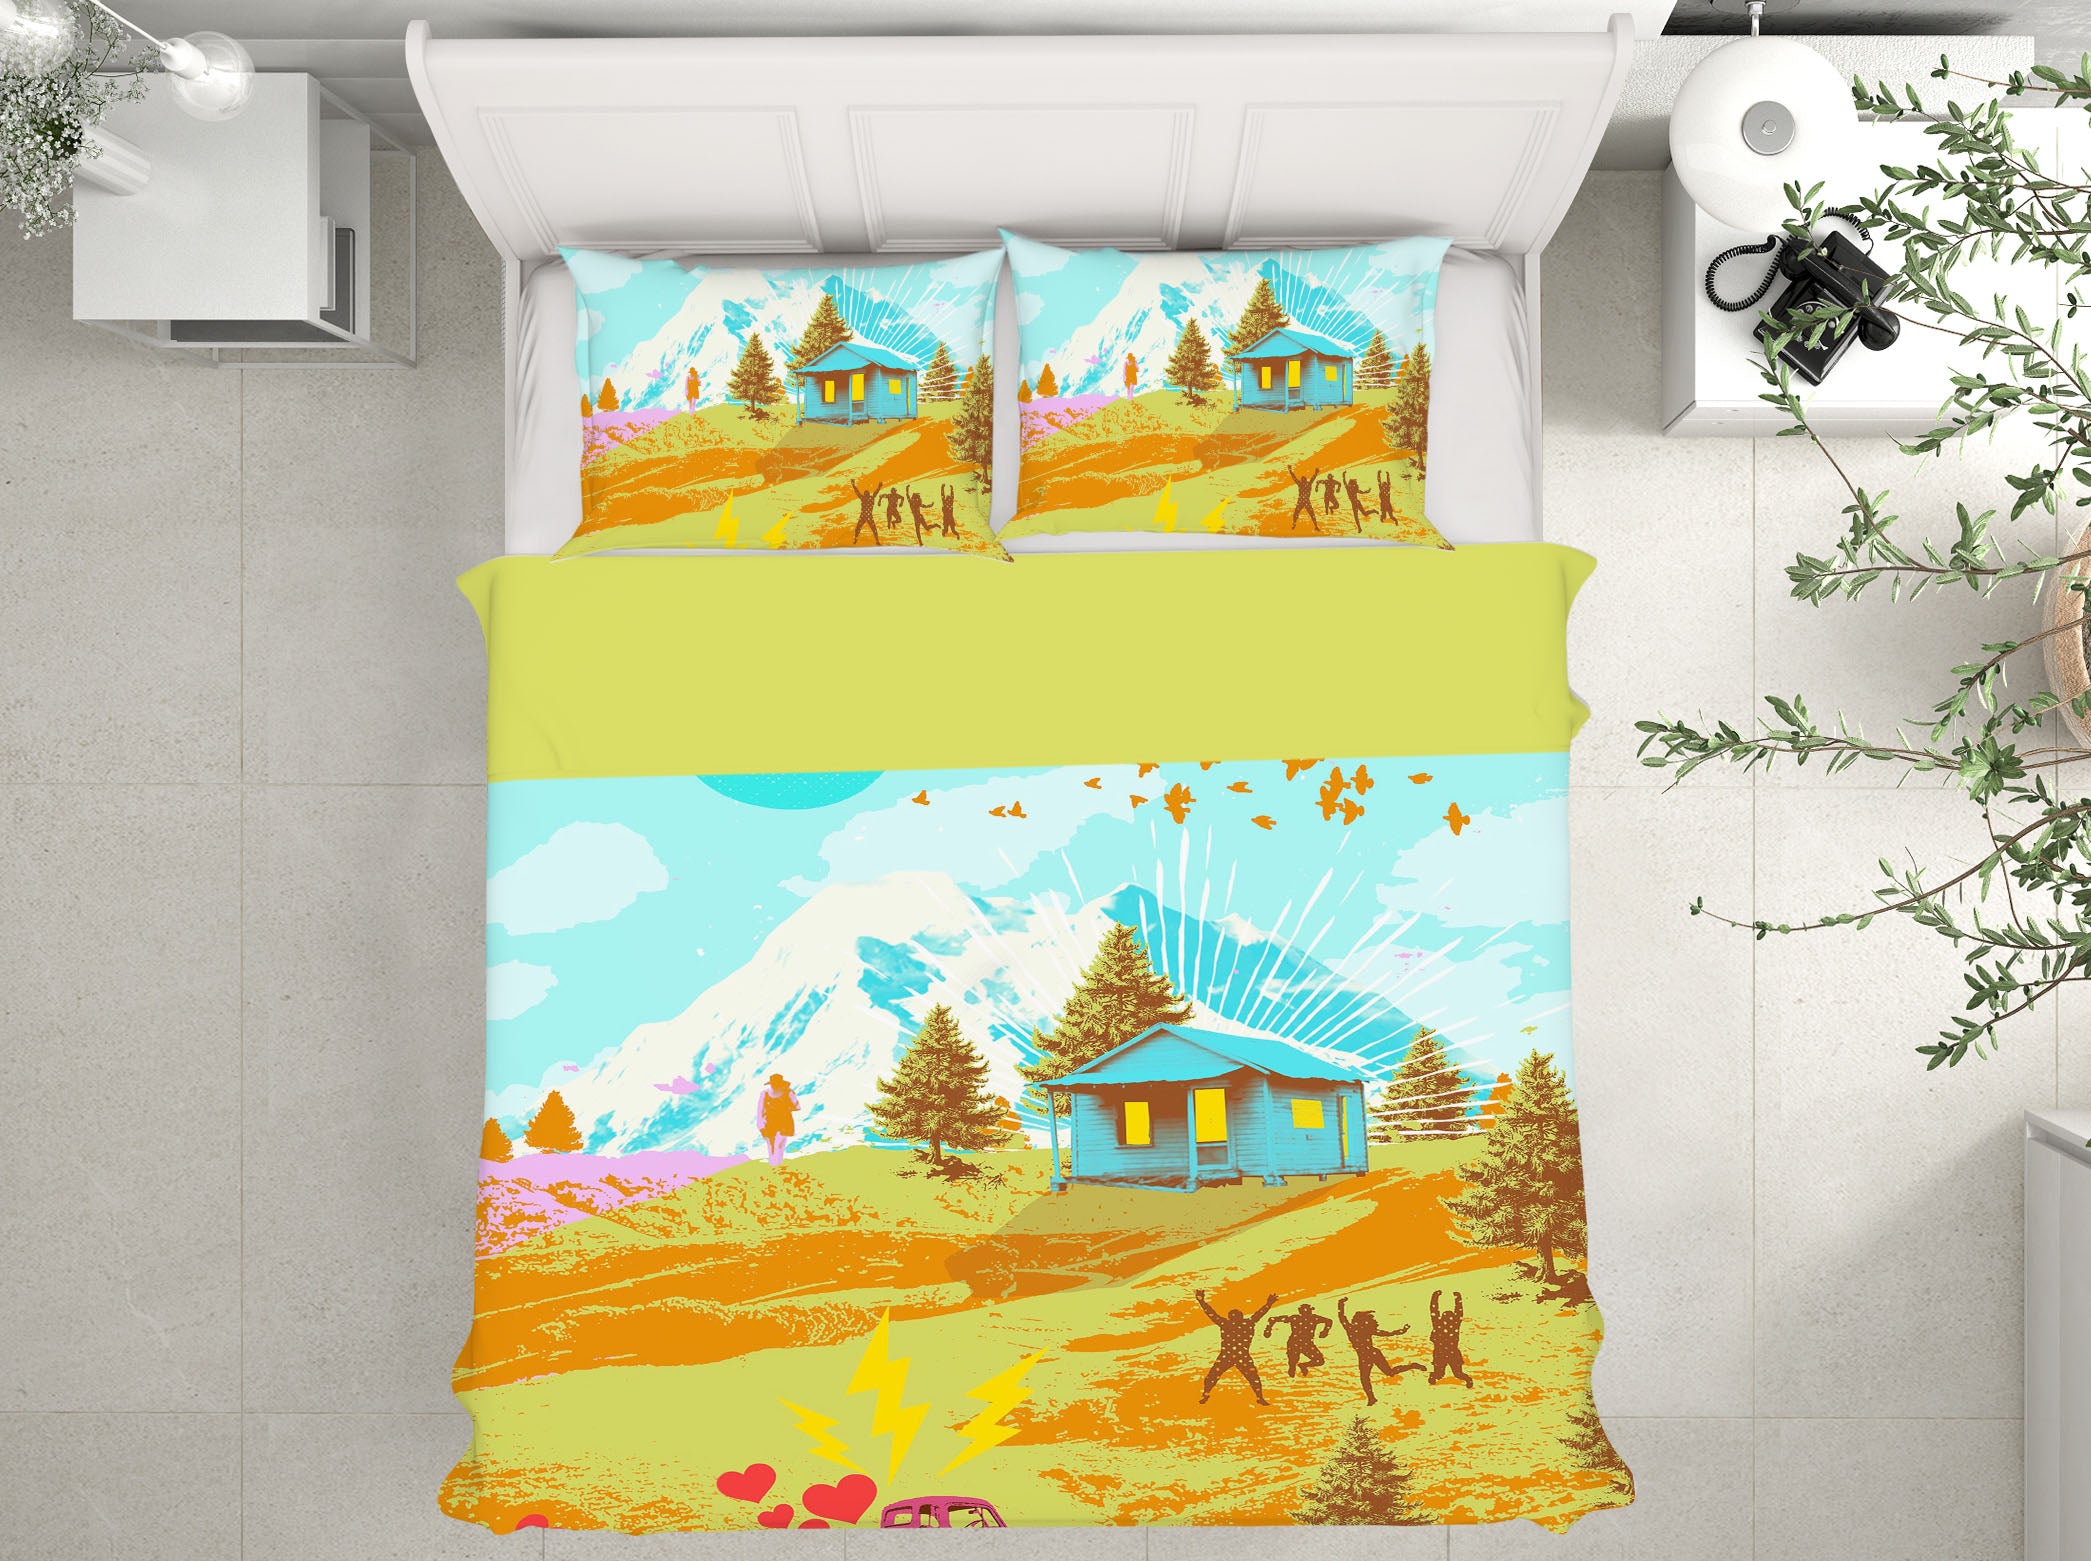 3D Outskirts 2018 Showdeer Bedding Bed Pillowcases Quilt